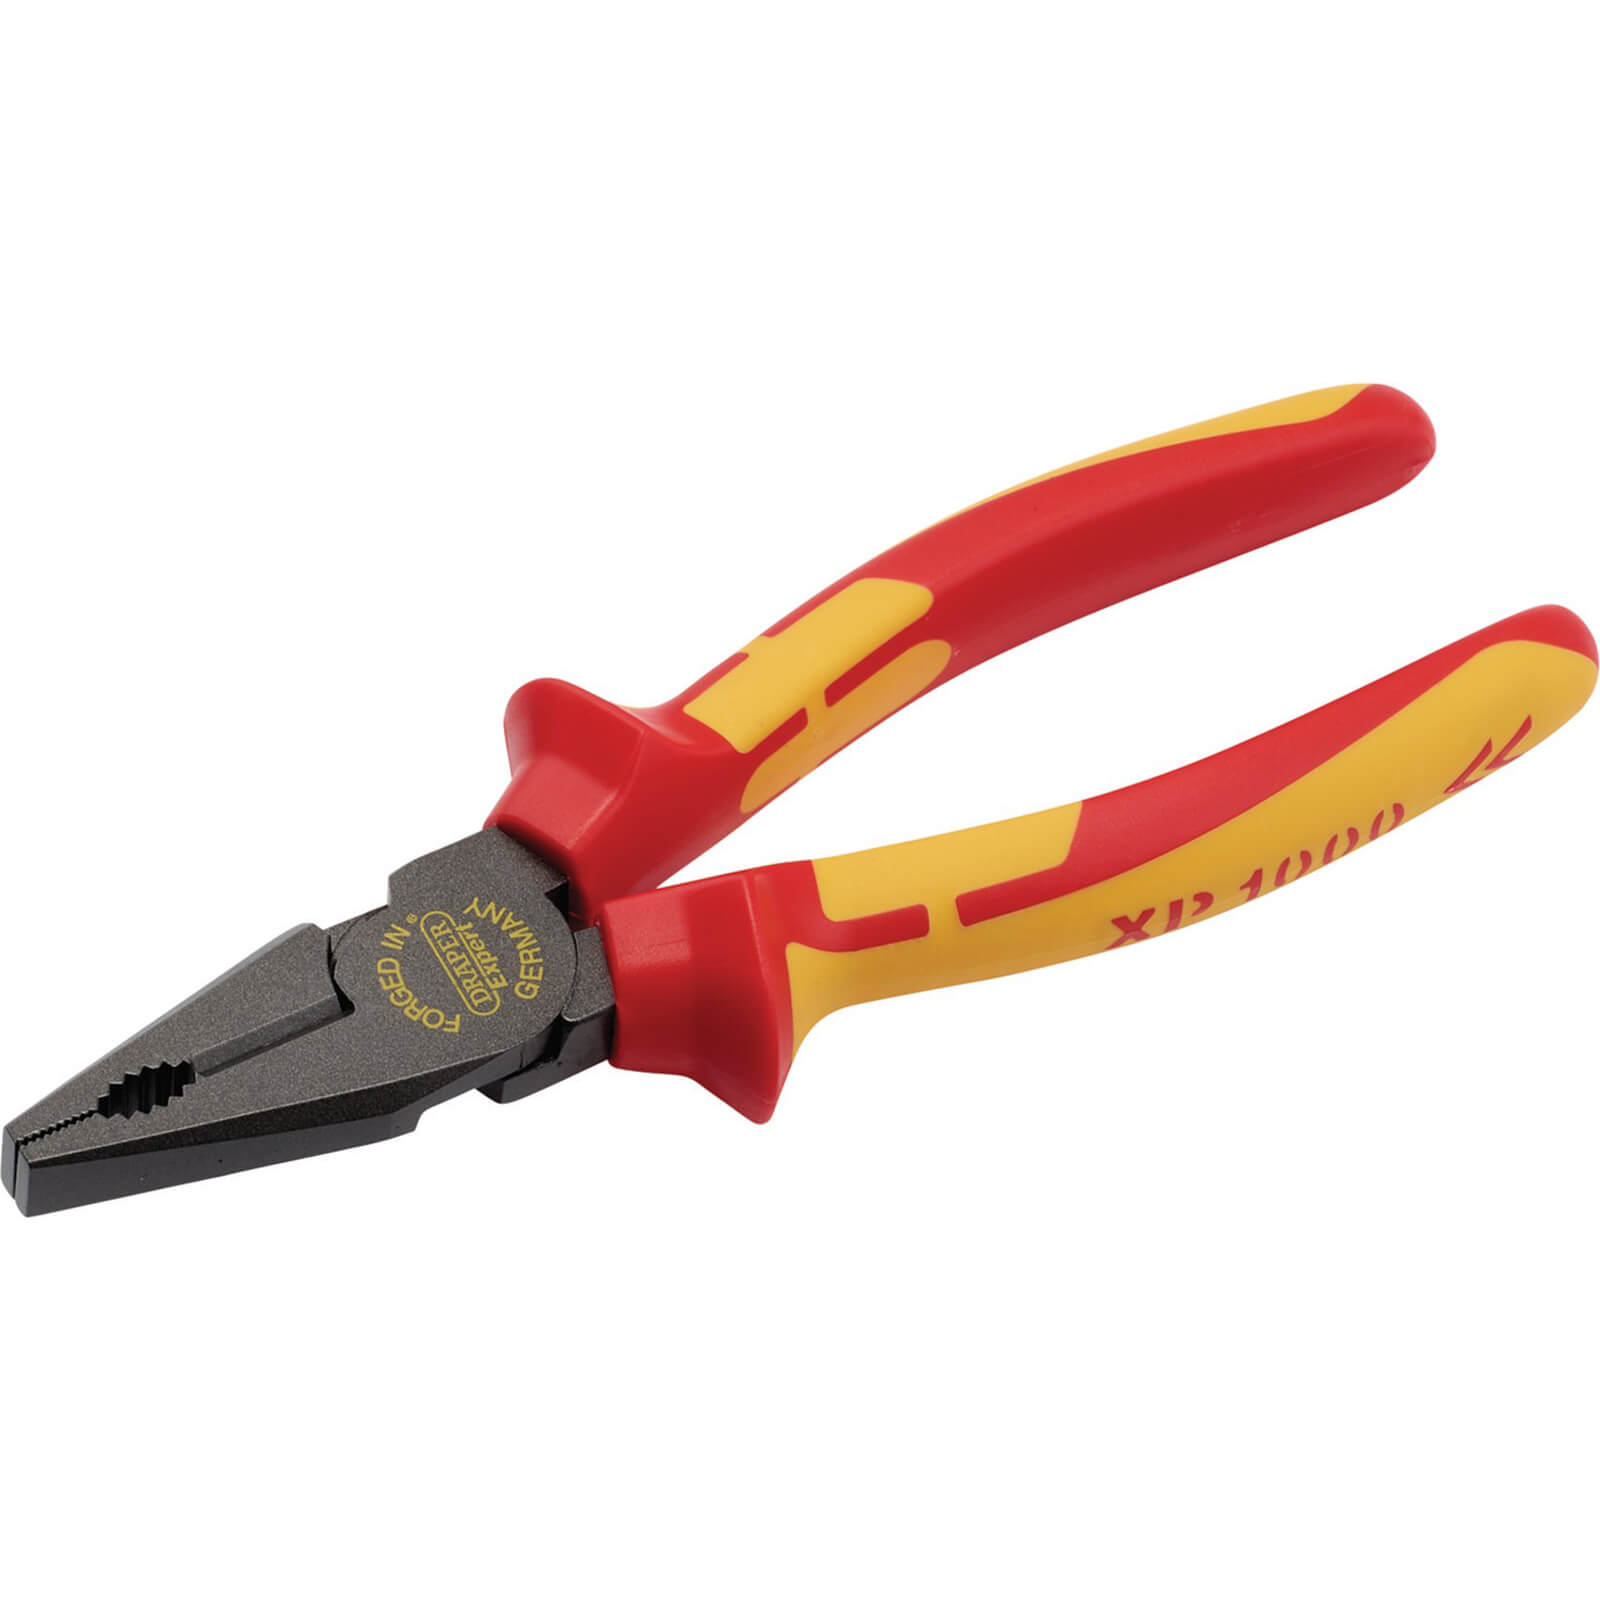 Draper XP1000 VDE Insulated High Leverage Combination Pliers 180mm